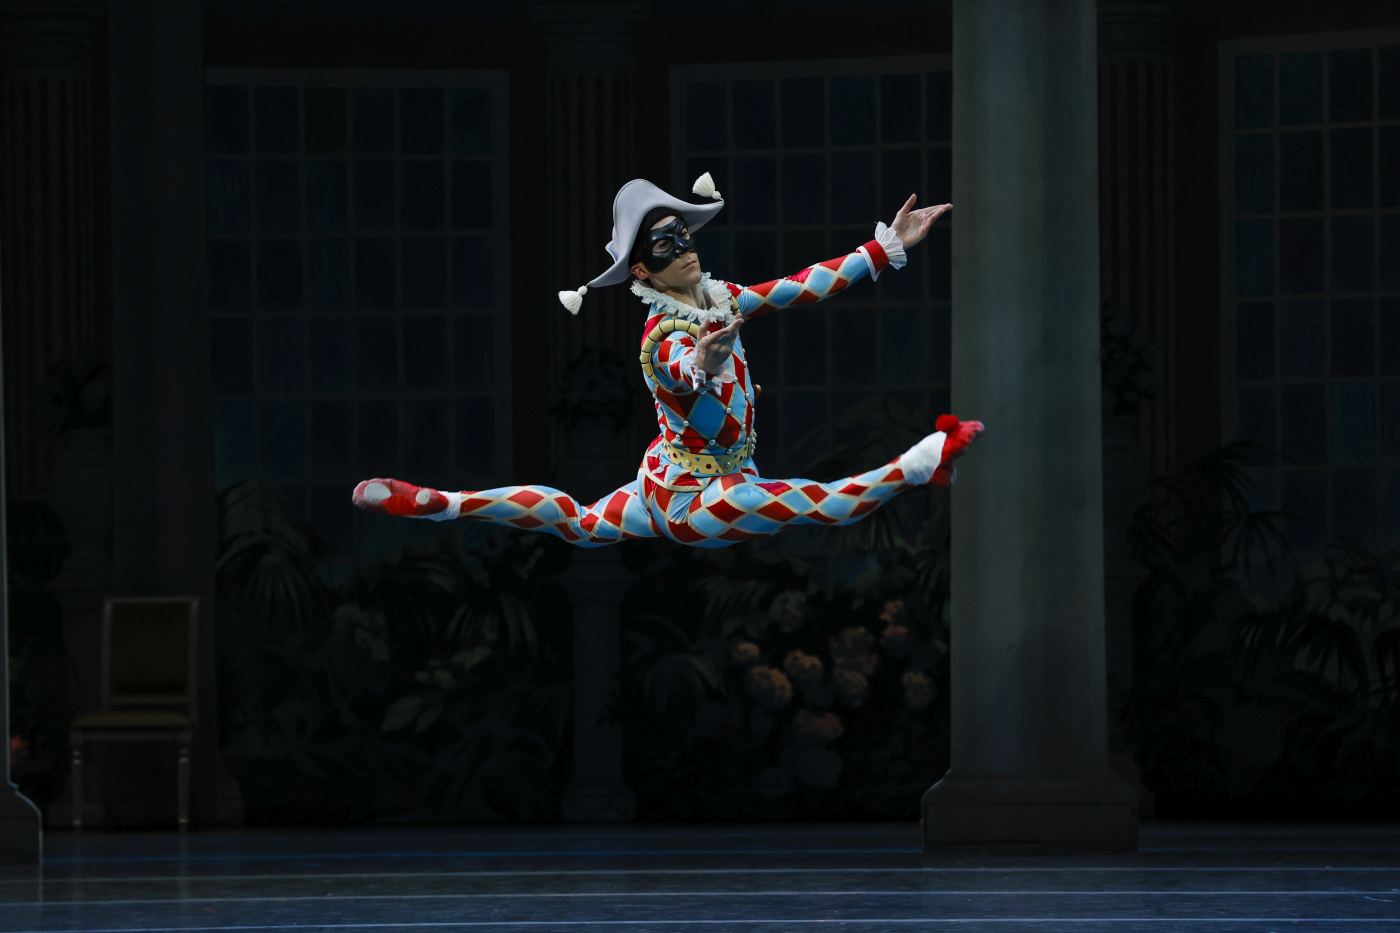 5. B.Chynoweth (Harlequin), “Harlequinade” by M.Petipa, additional choreography by A.Ratmansky; The Australian Ballet 2022 © J.Busby